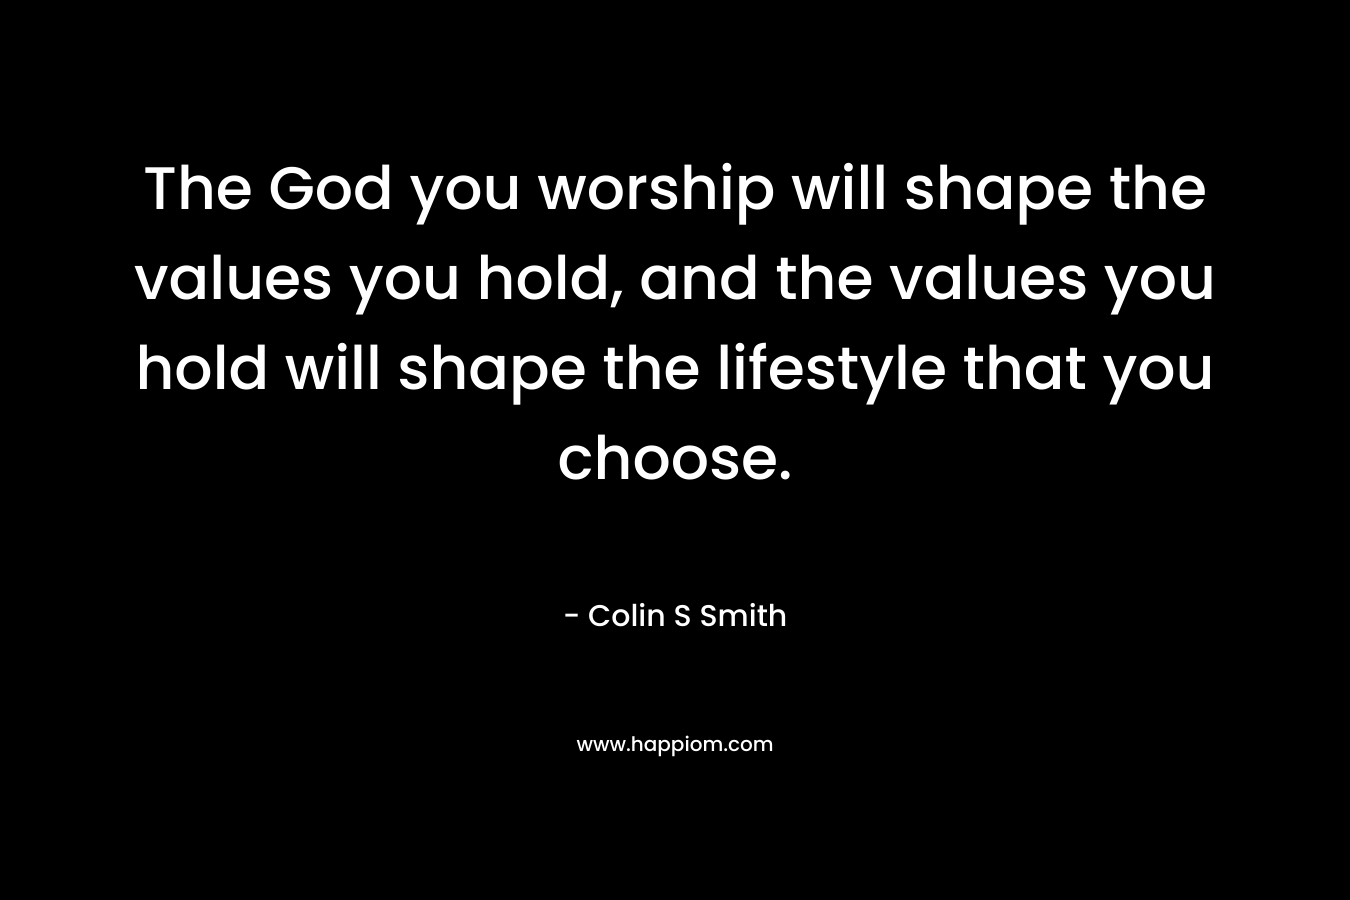 The God you worship will shape the values you hold, and the values you hold will shape the lifestyle that you choose.